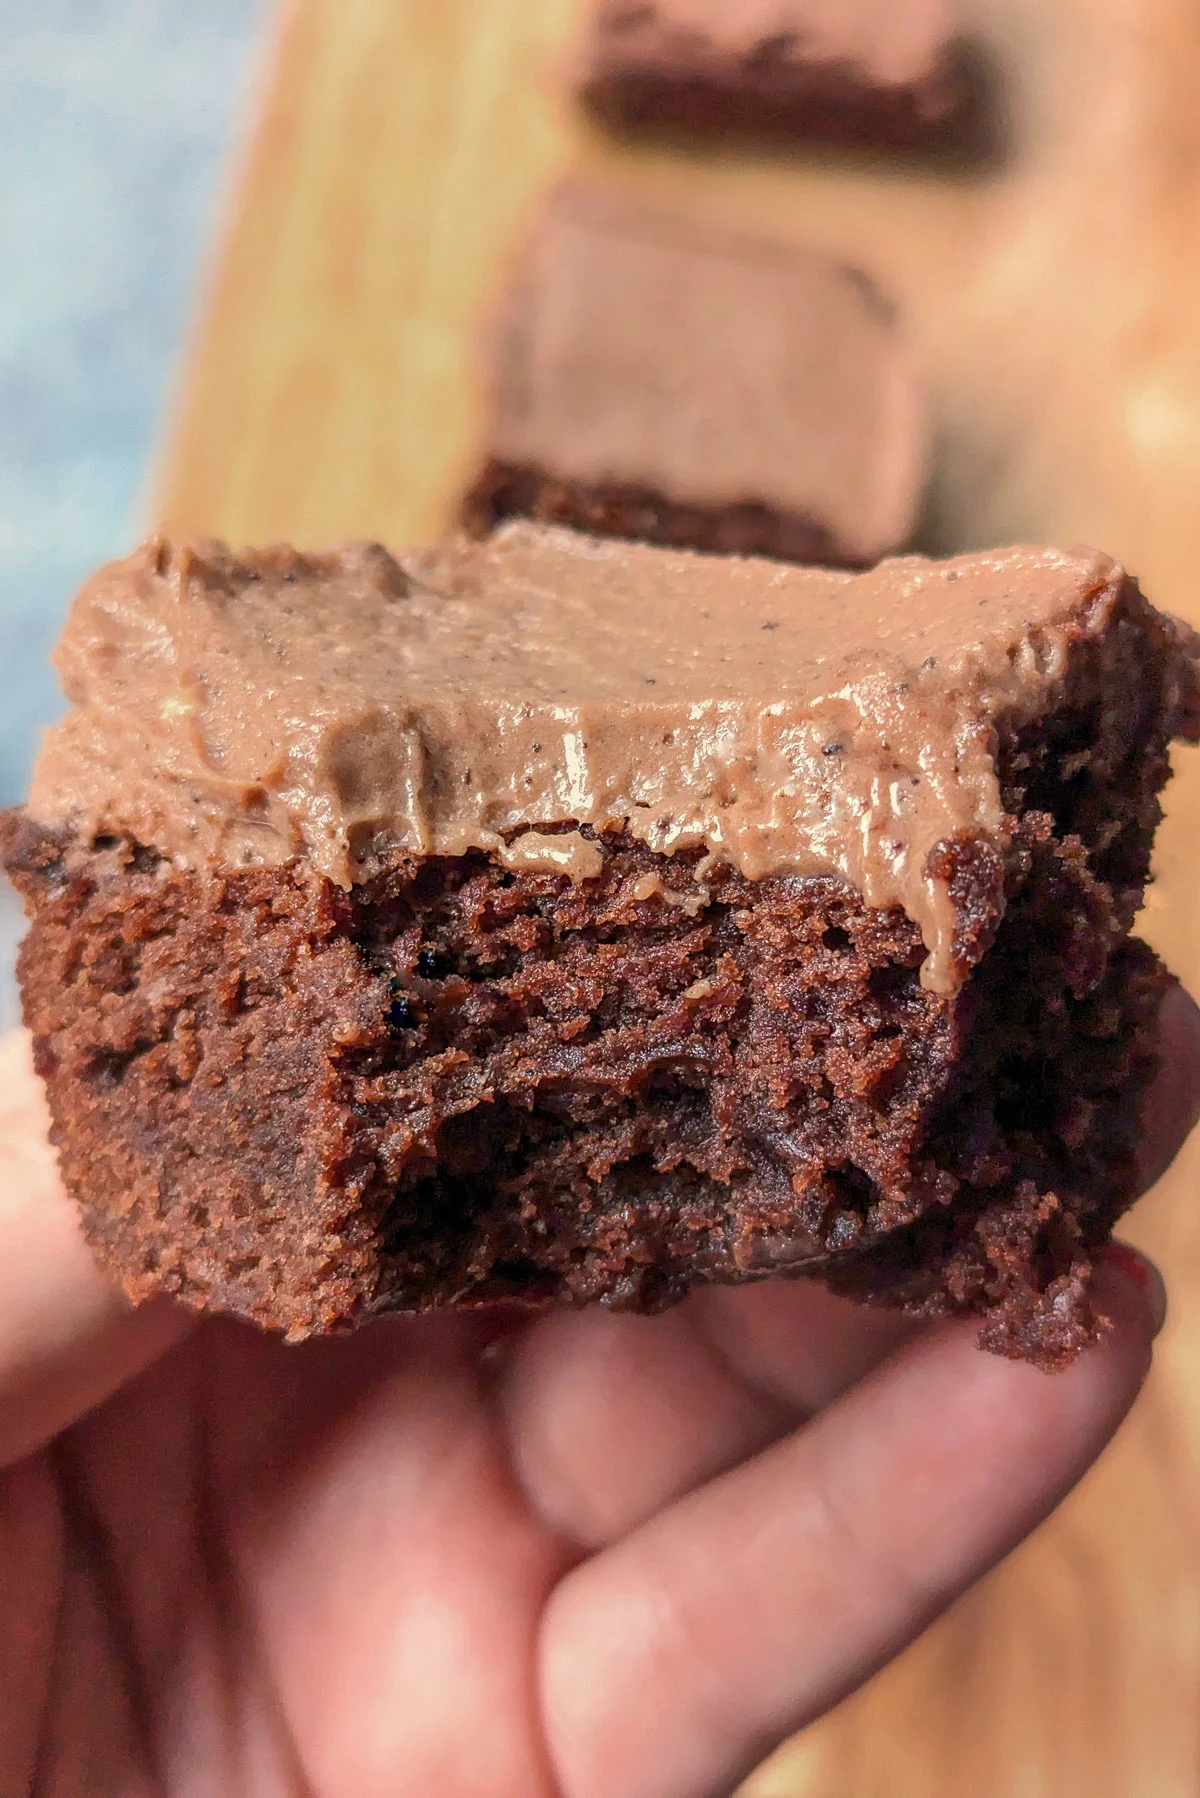 Cream cheese frosting spread onto brownies.